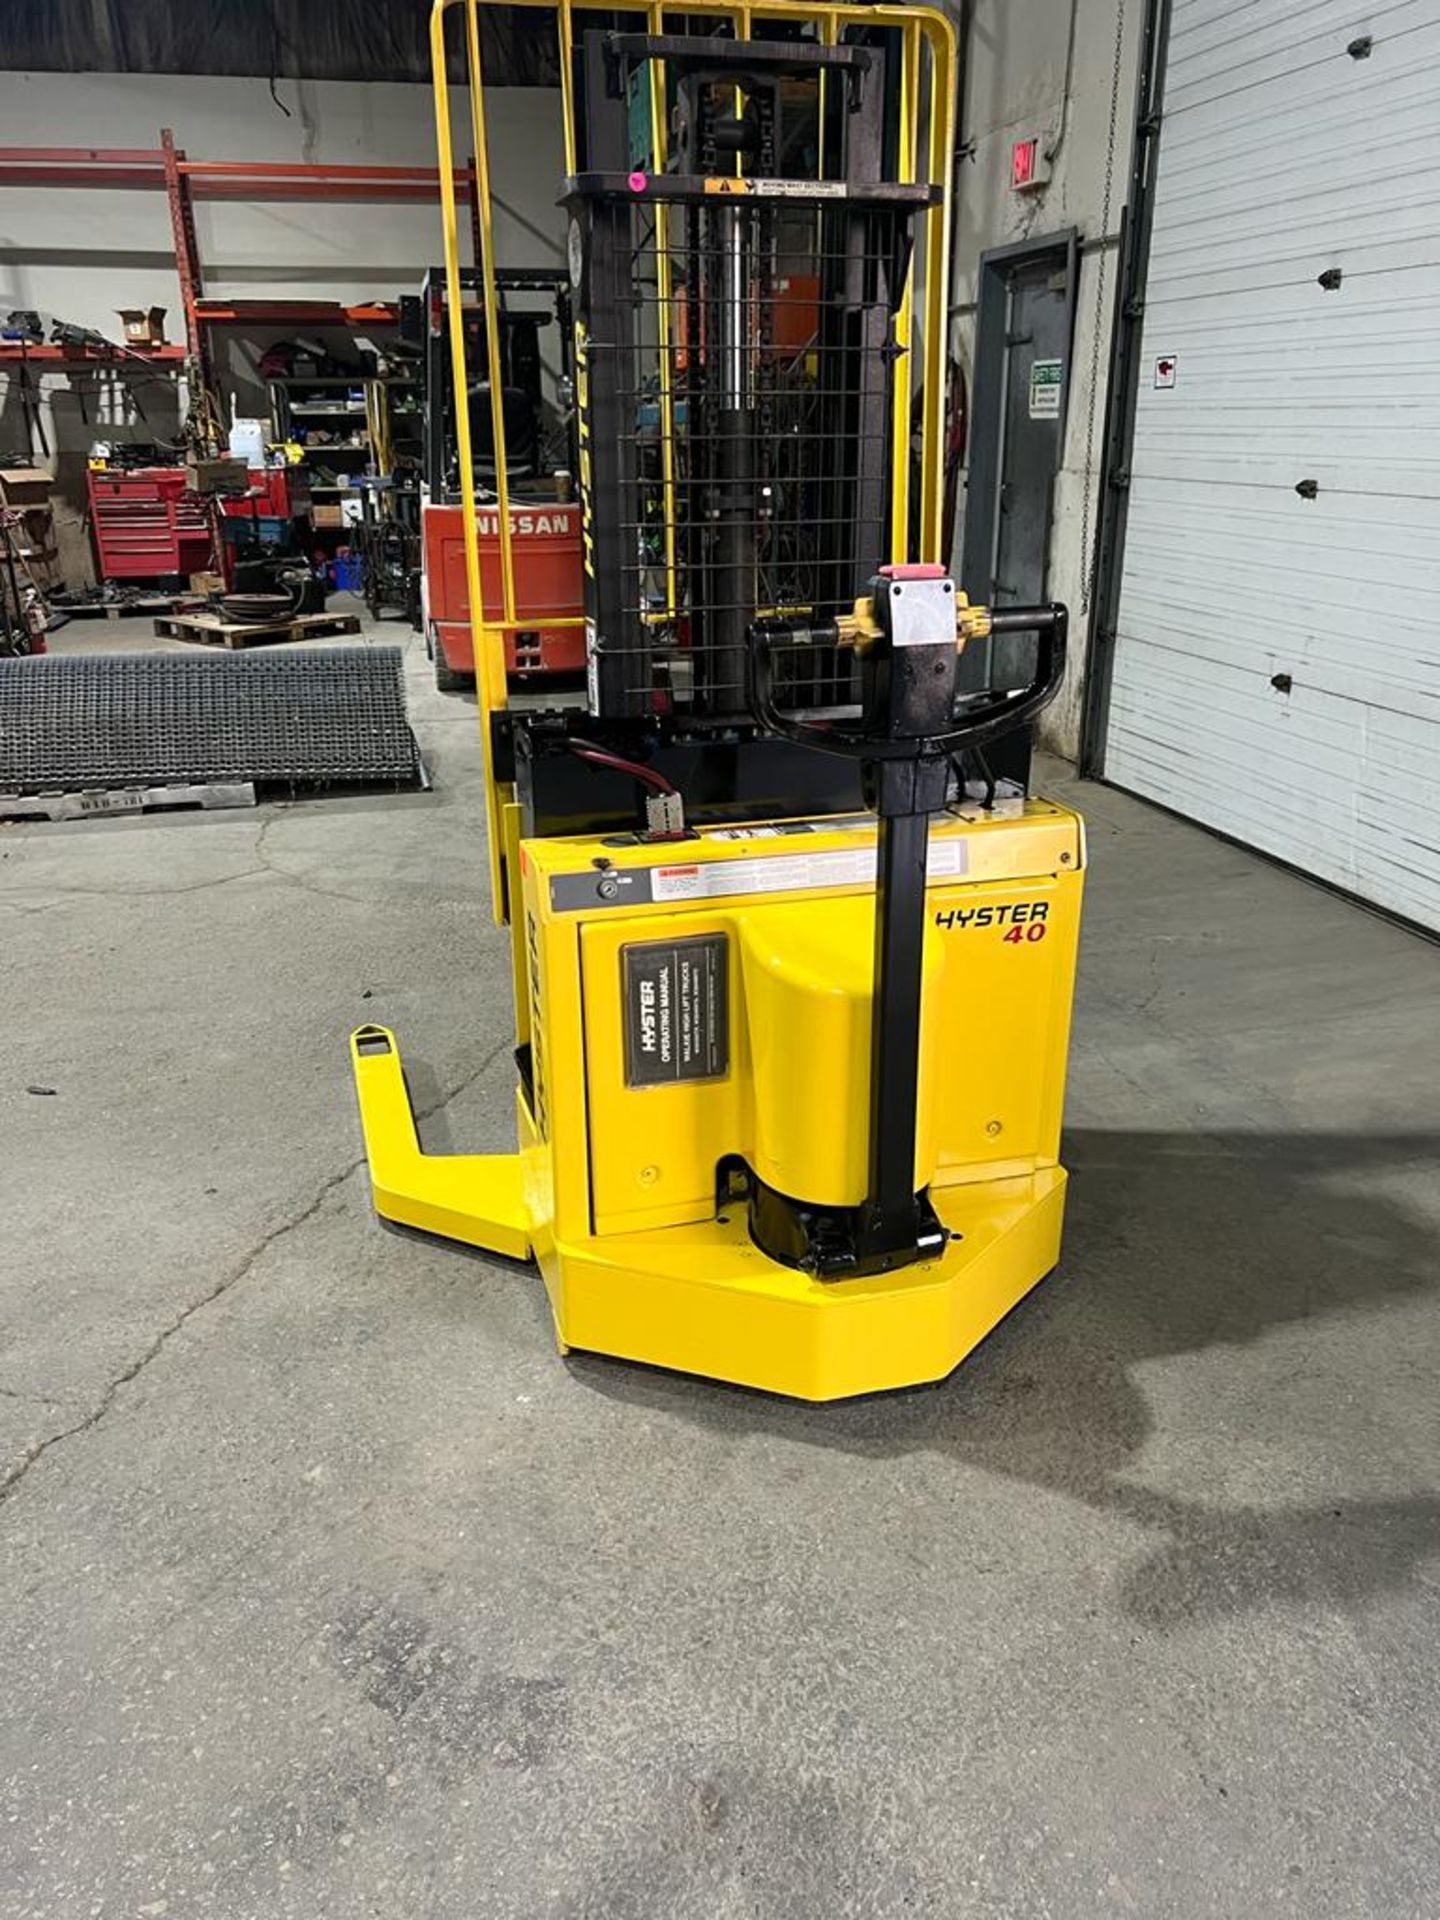 Hyster Pallet Stacker Walk Behind 4,000lbs capacity electric Powered Pallet Cart 24V with LOW HOURS - Image 3 of 3